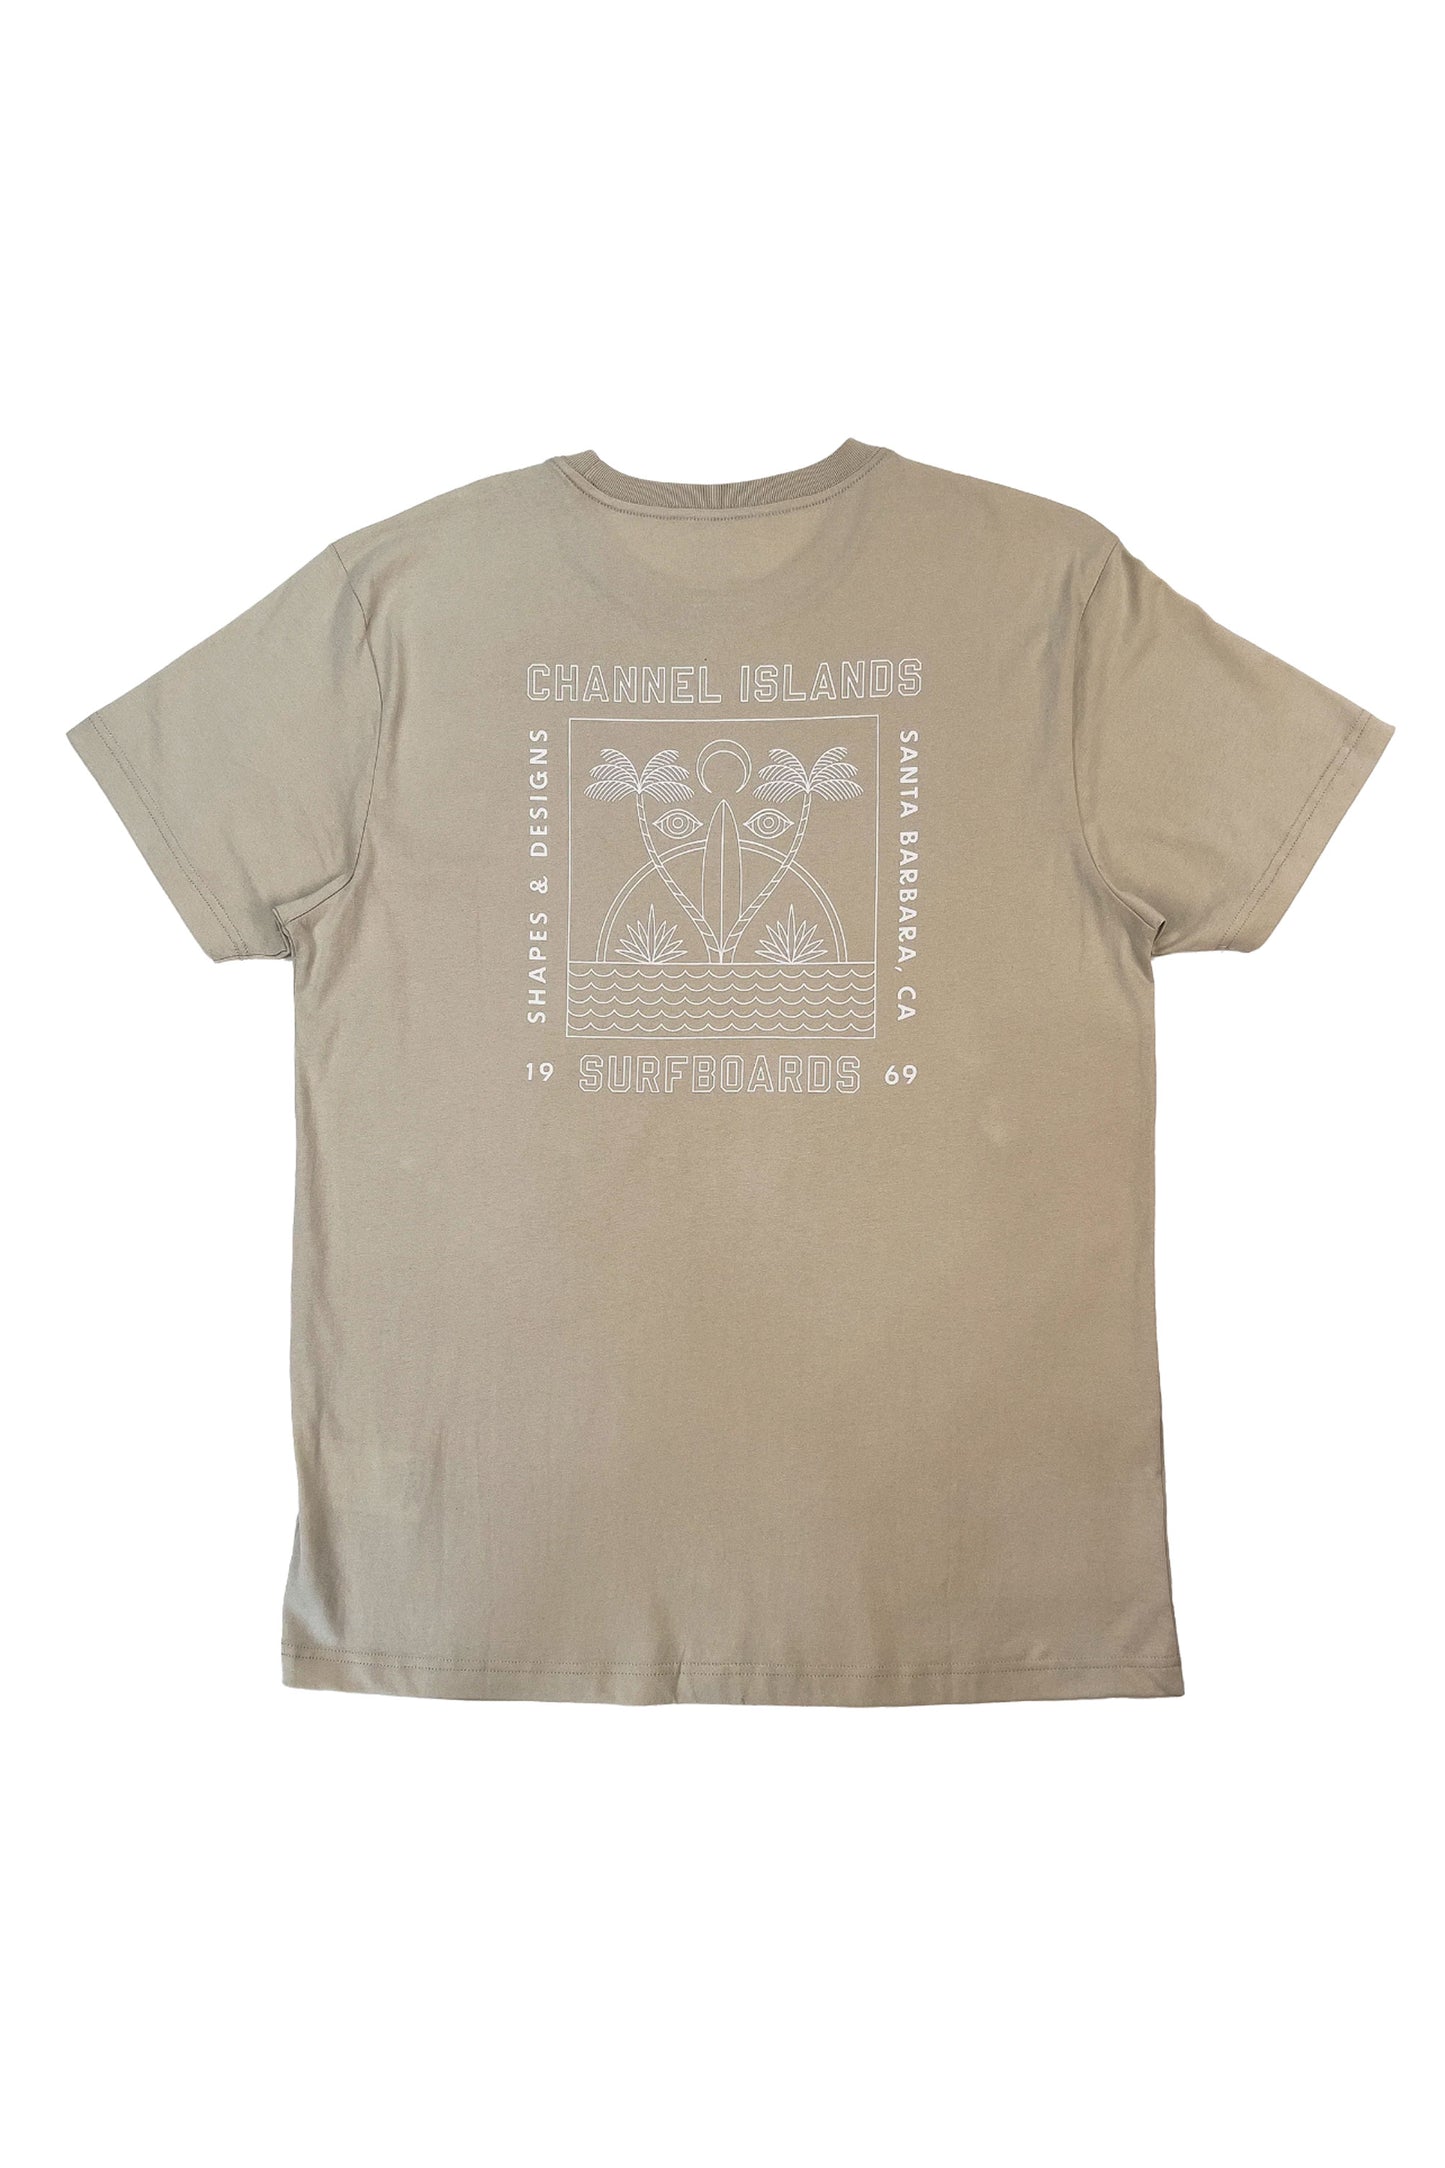 Pukas-Surf-Shop-channel-islands-clothing-eyes-short-sleeve-tshirt-cement